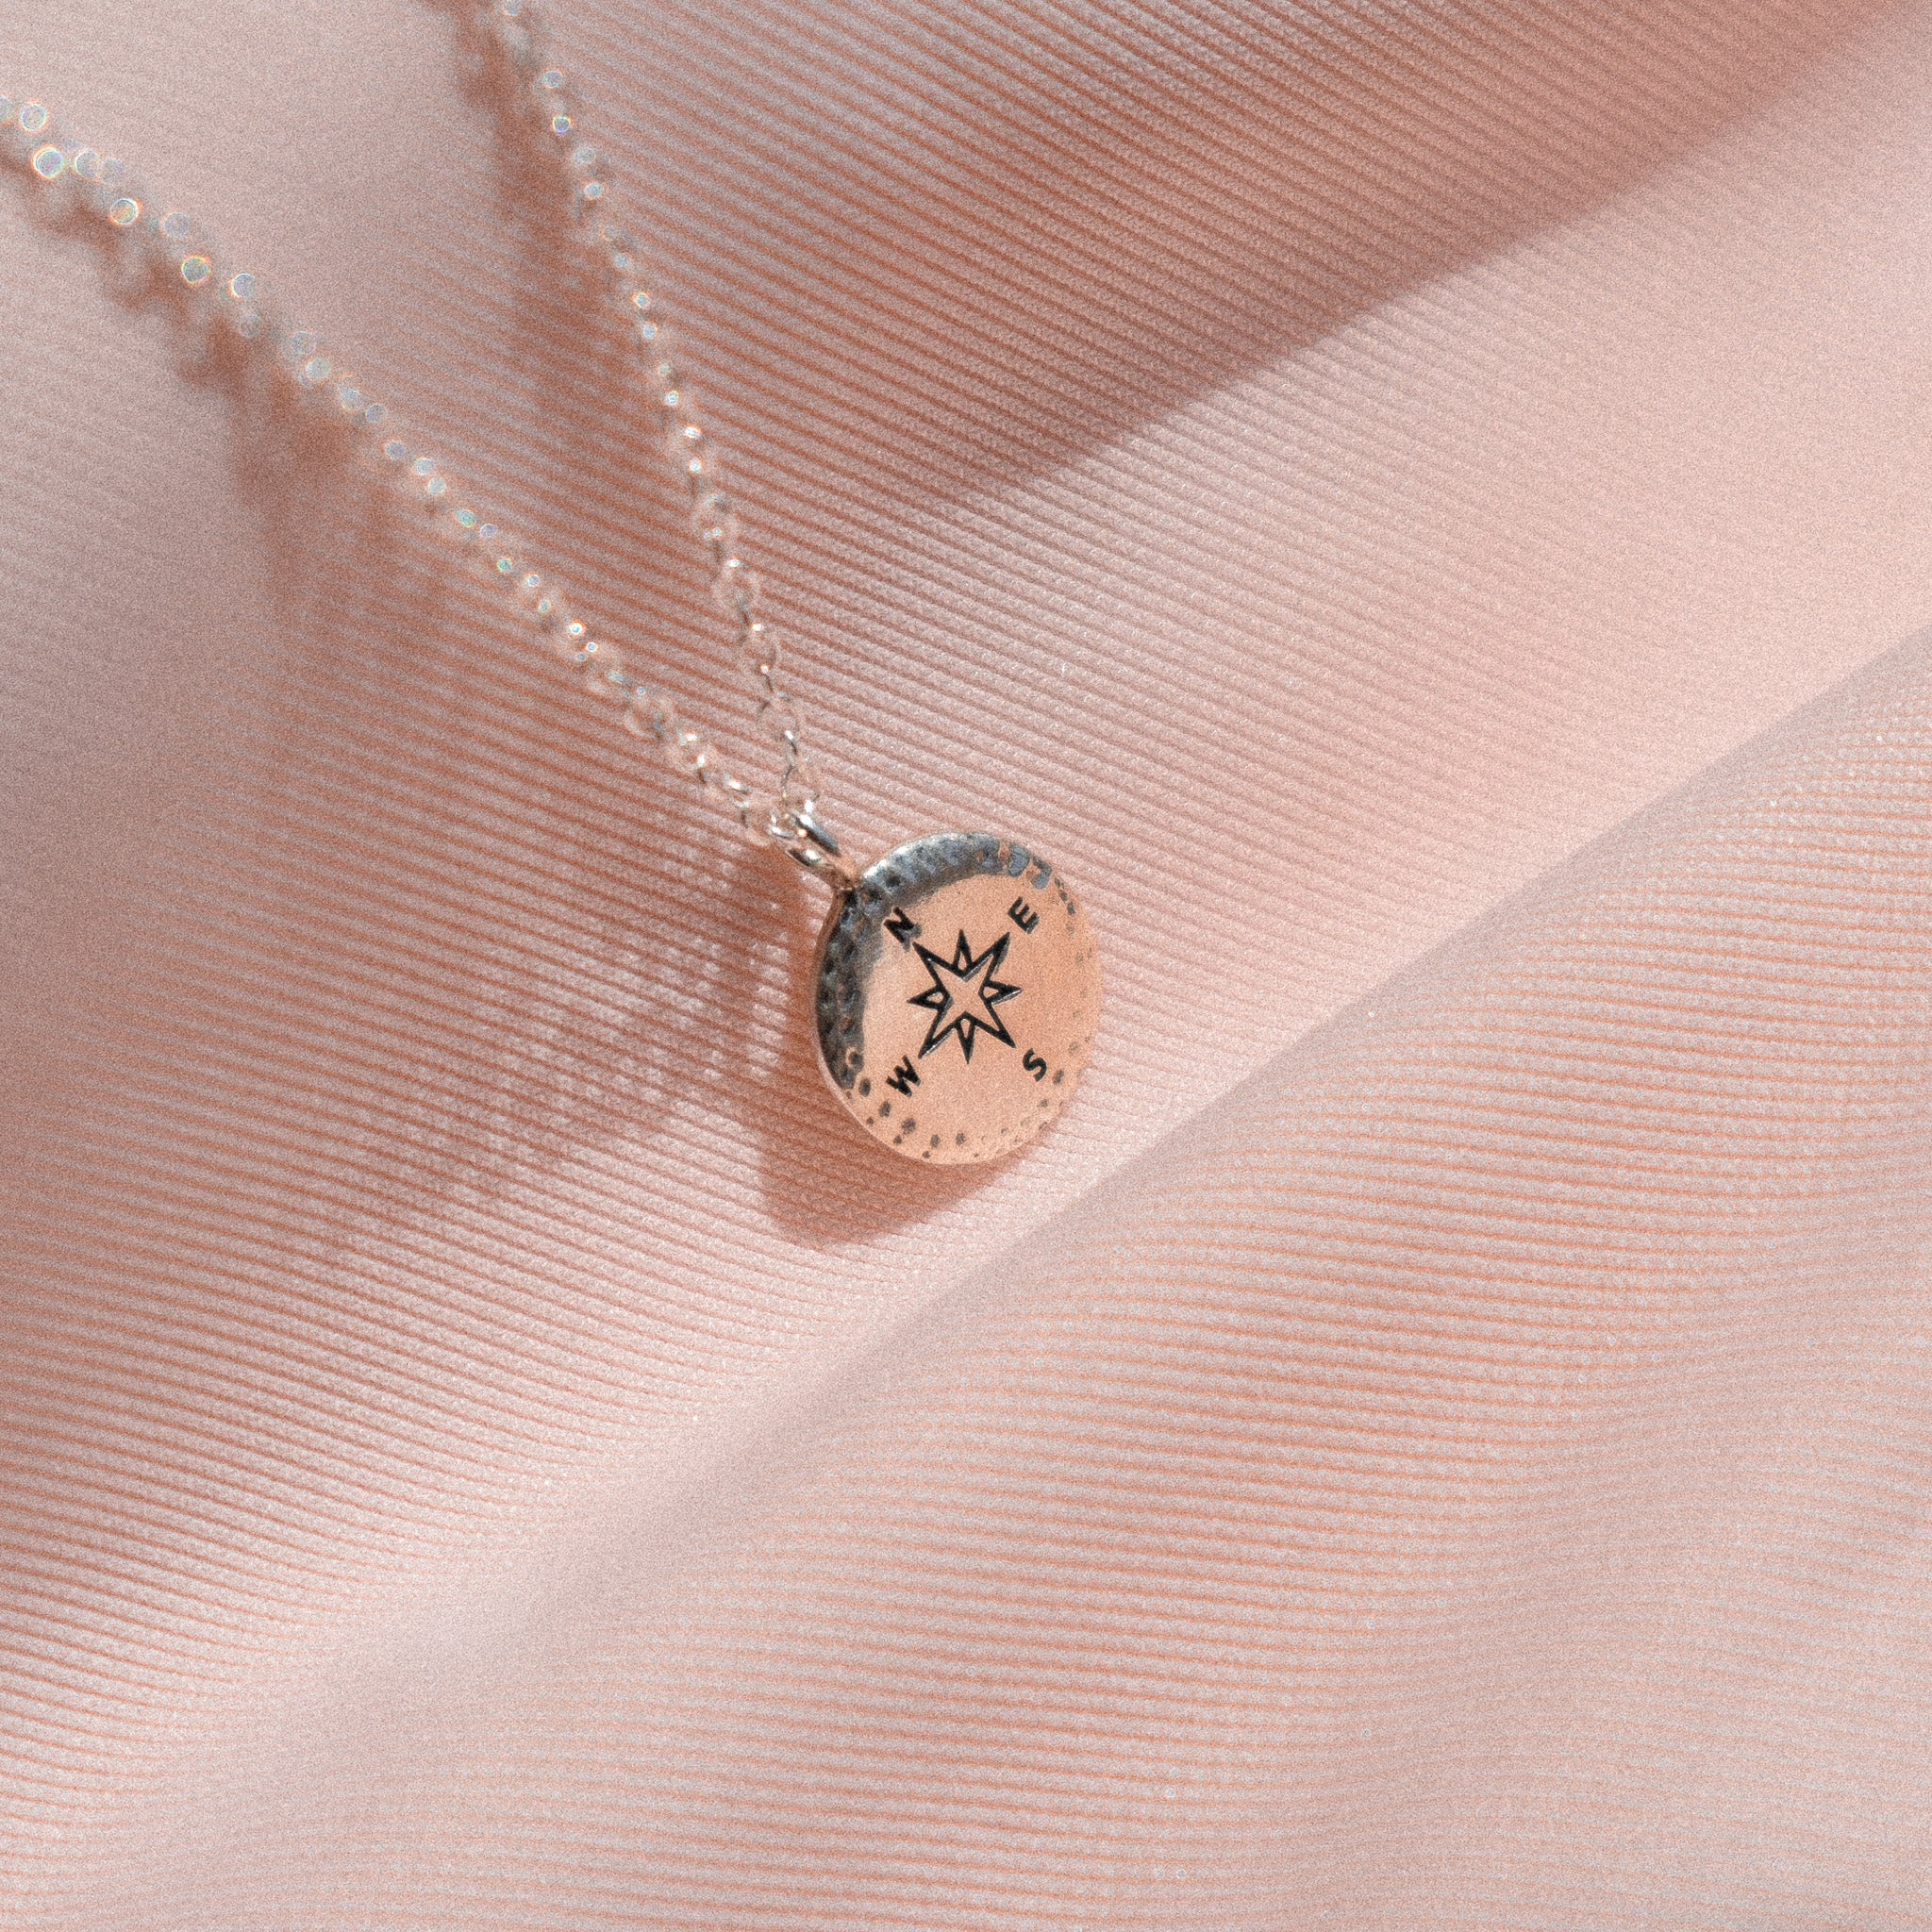 "Bec" Sterling Silver Compass Necklace